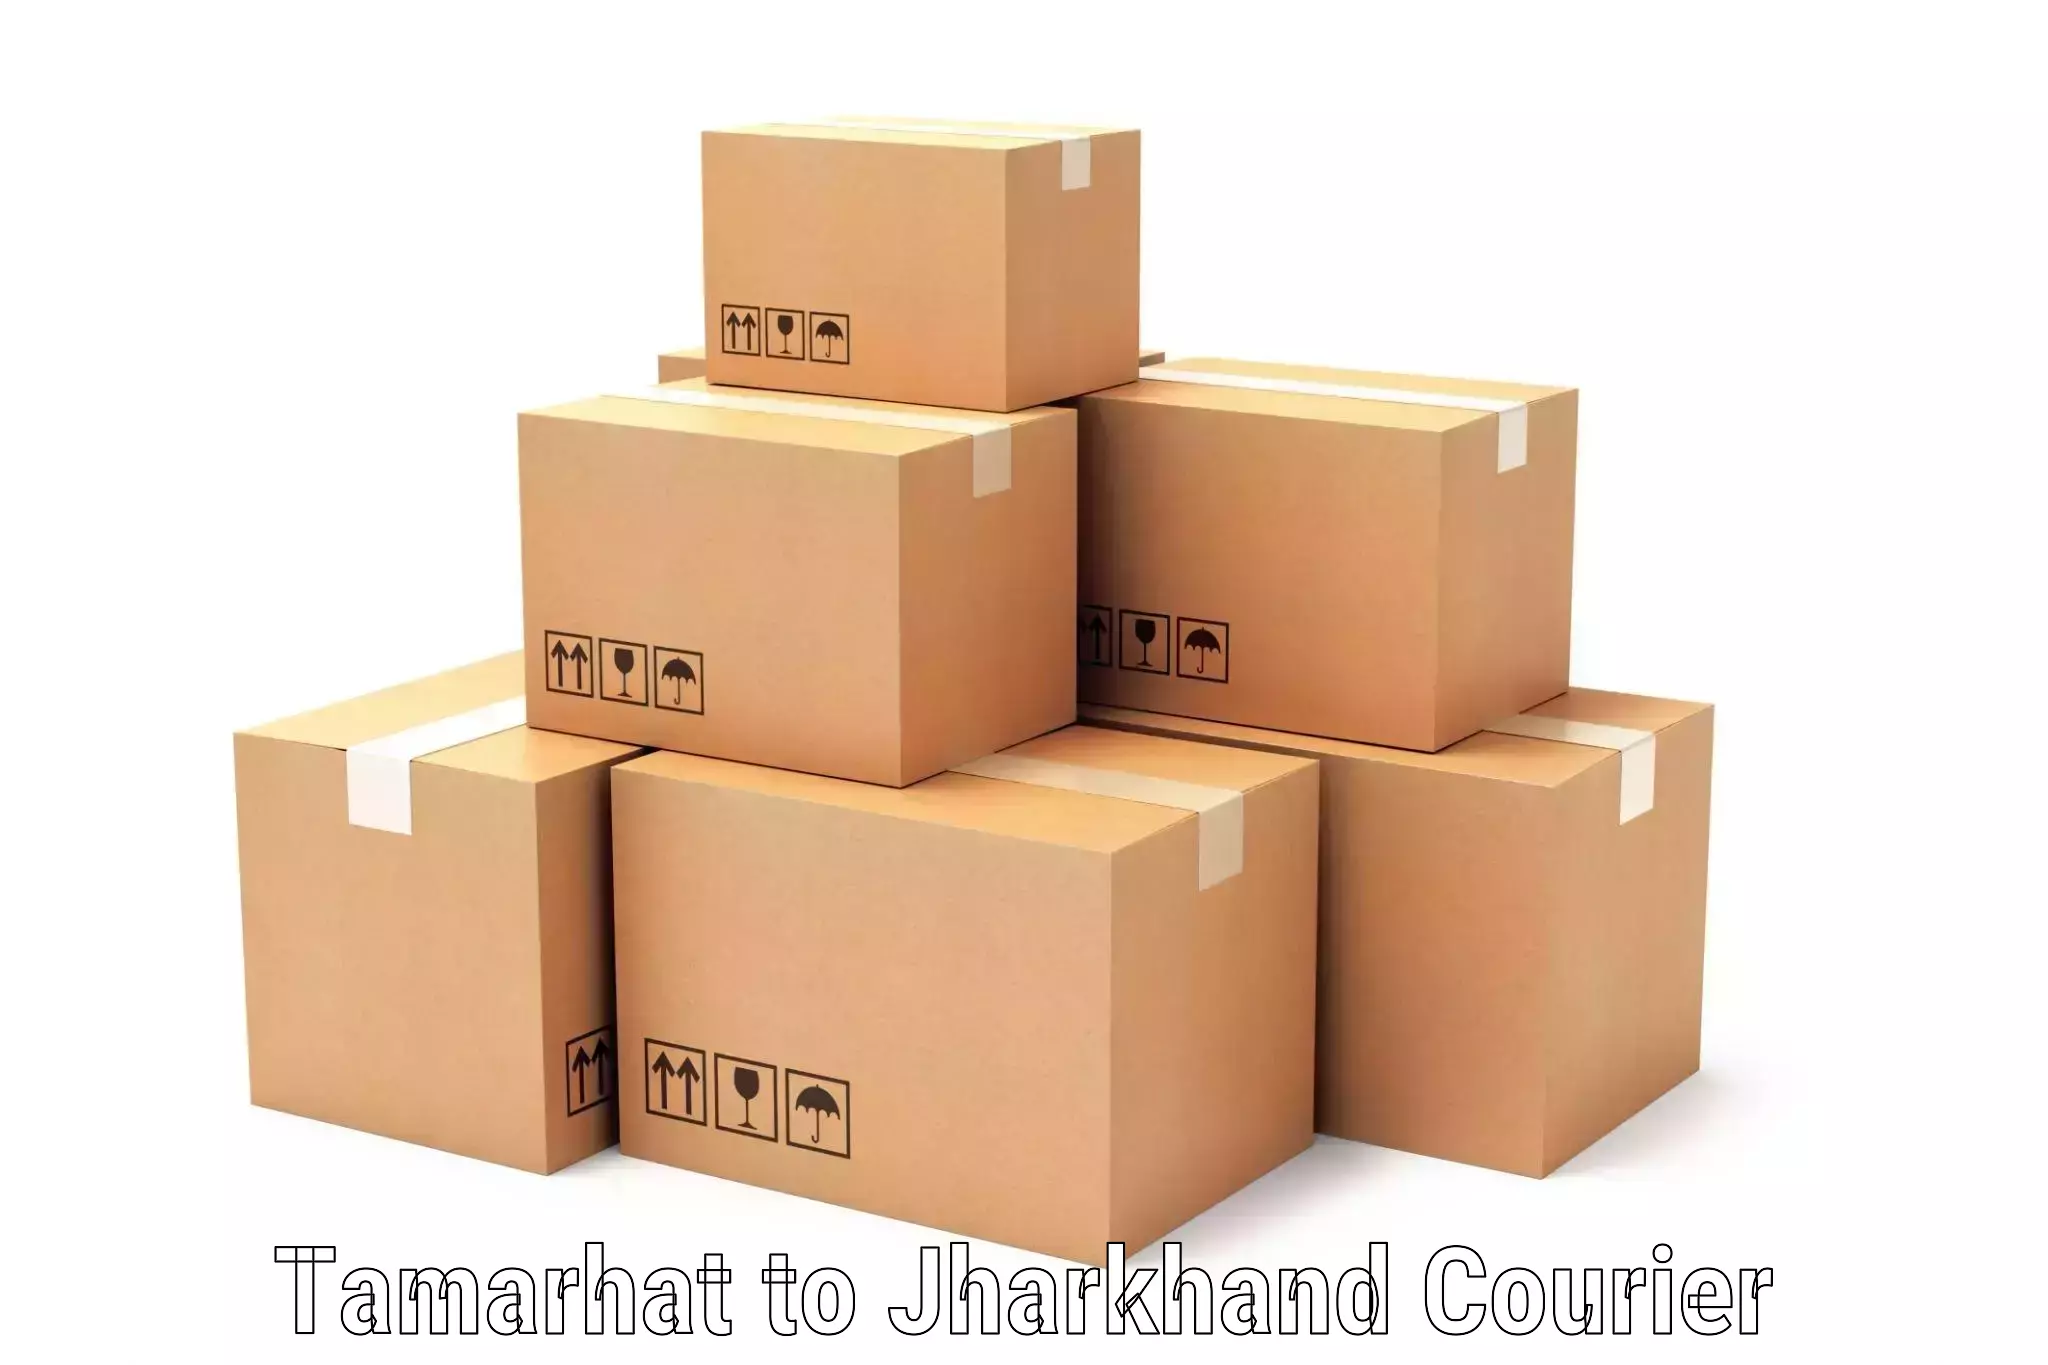 Online shipping calculator in Tamarhat to Jharkhand